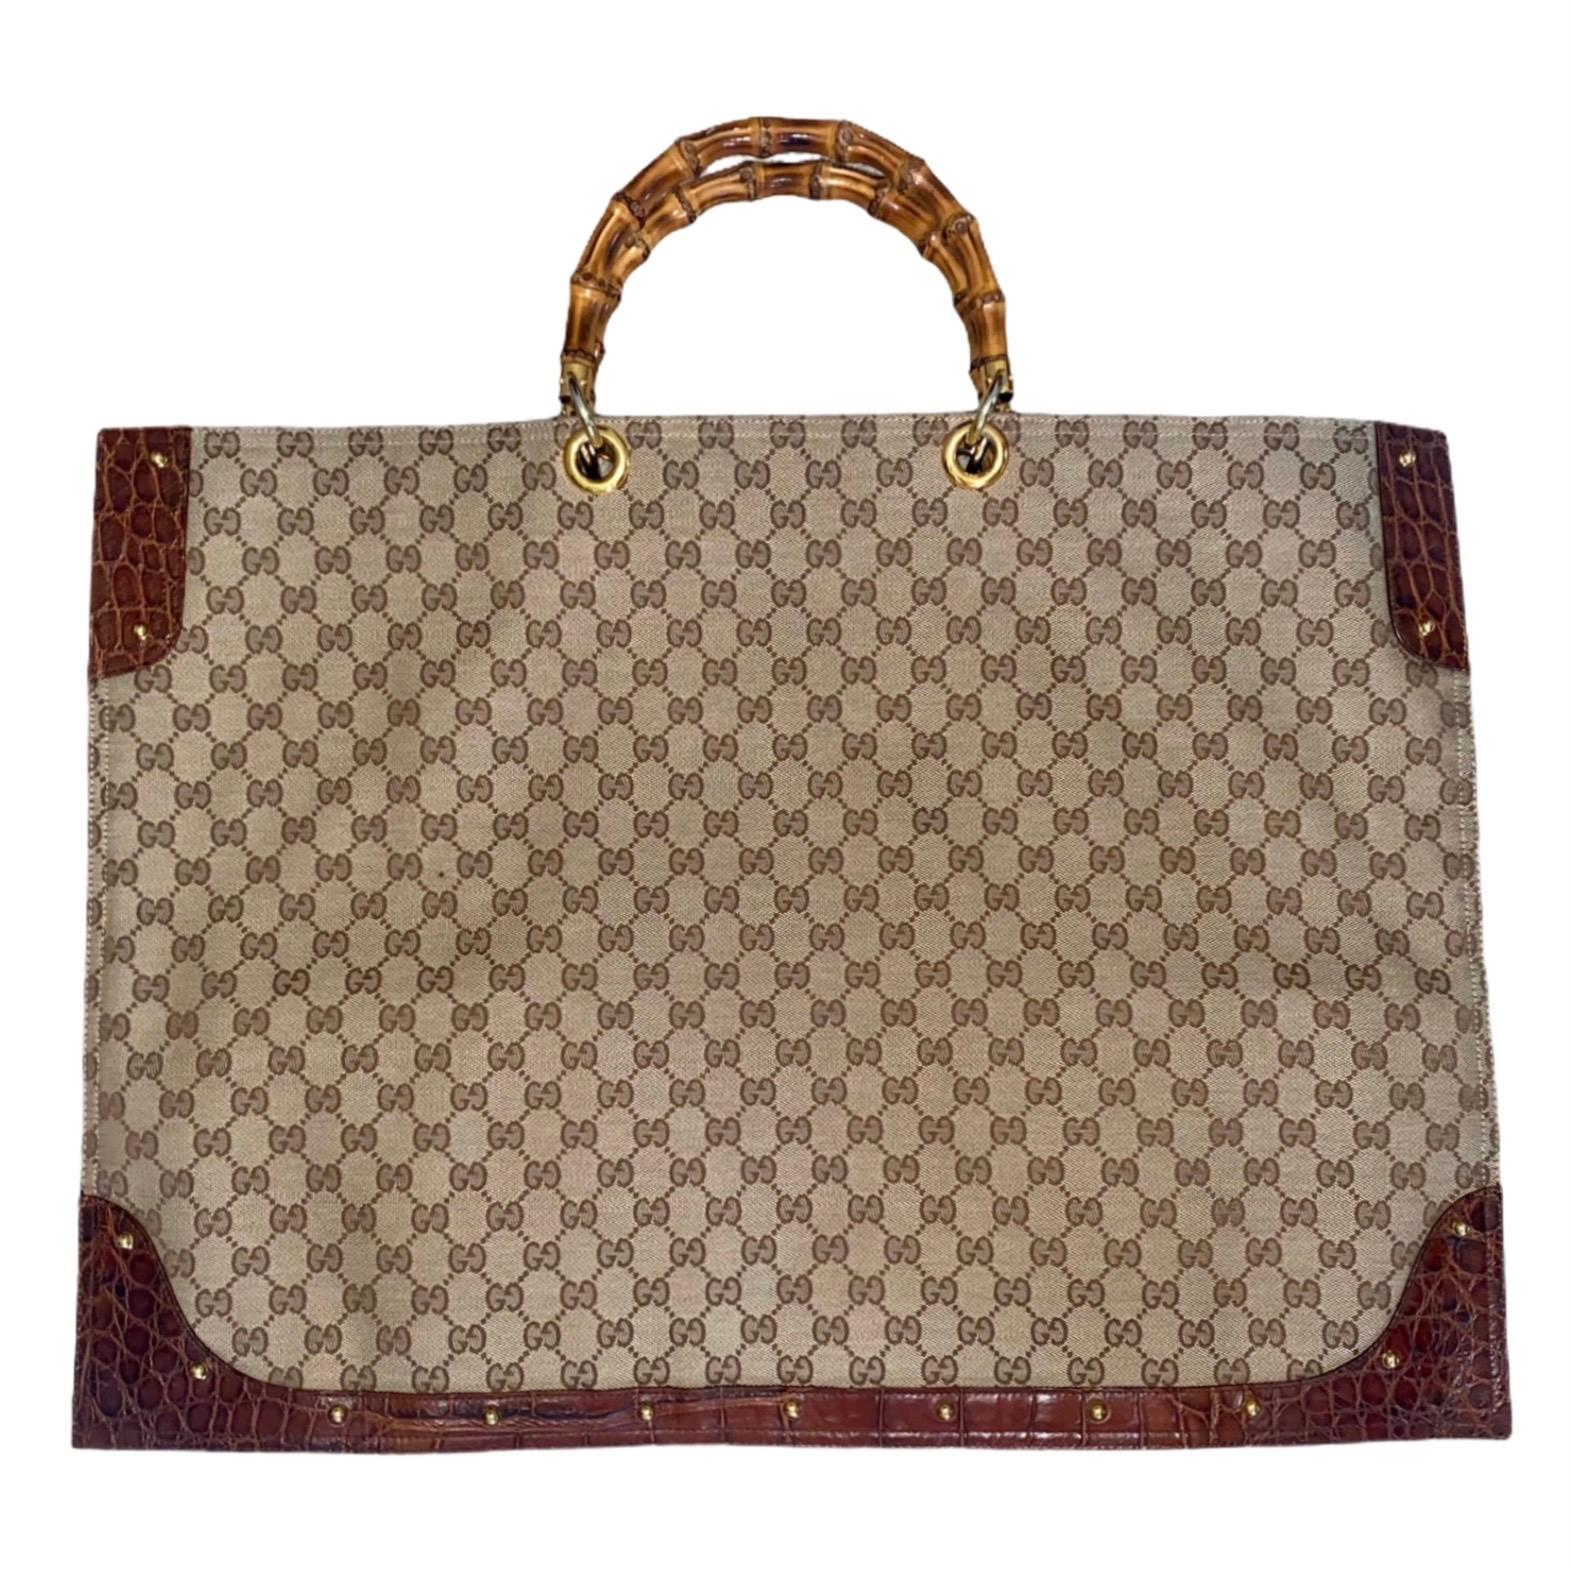 

DETAILS: 
An extremely rare GUCCI signature piece that will last you for many years

This piece has it all - a perfect combination of all GUCCI signature details!

Made of Gucci‘s famous GG monogram canvas Chocolate-brown exotic crocodile skin